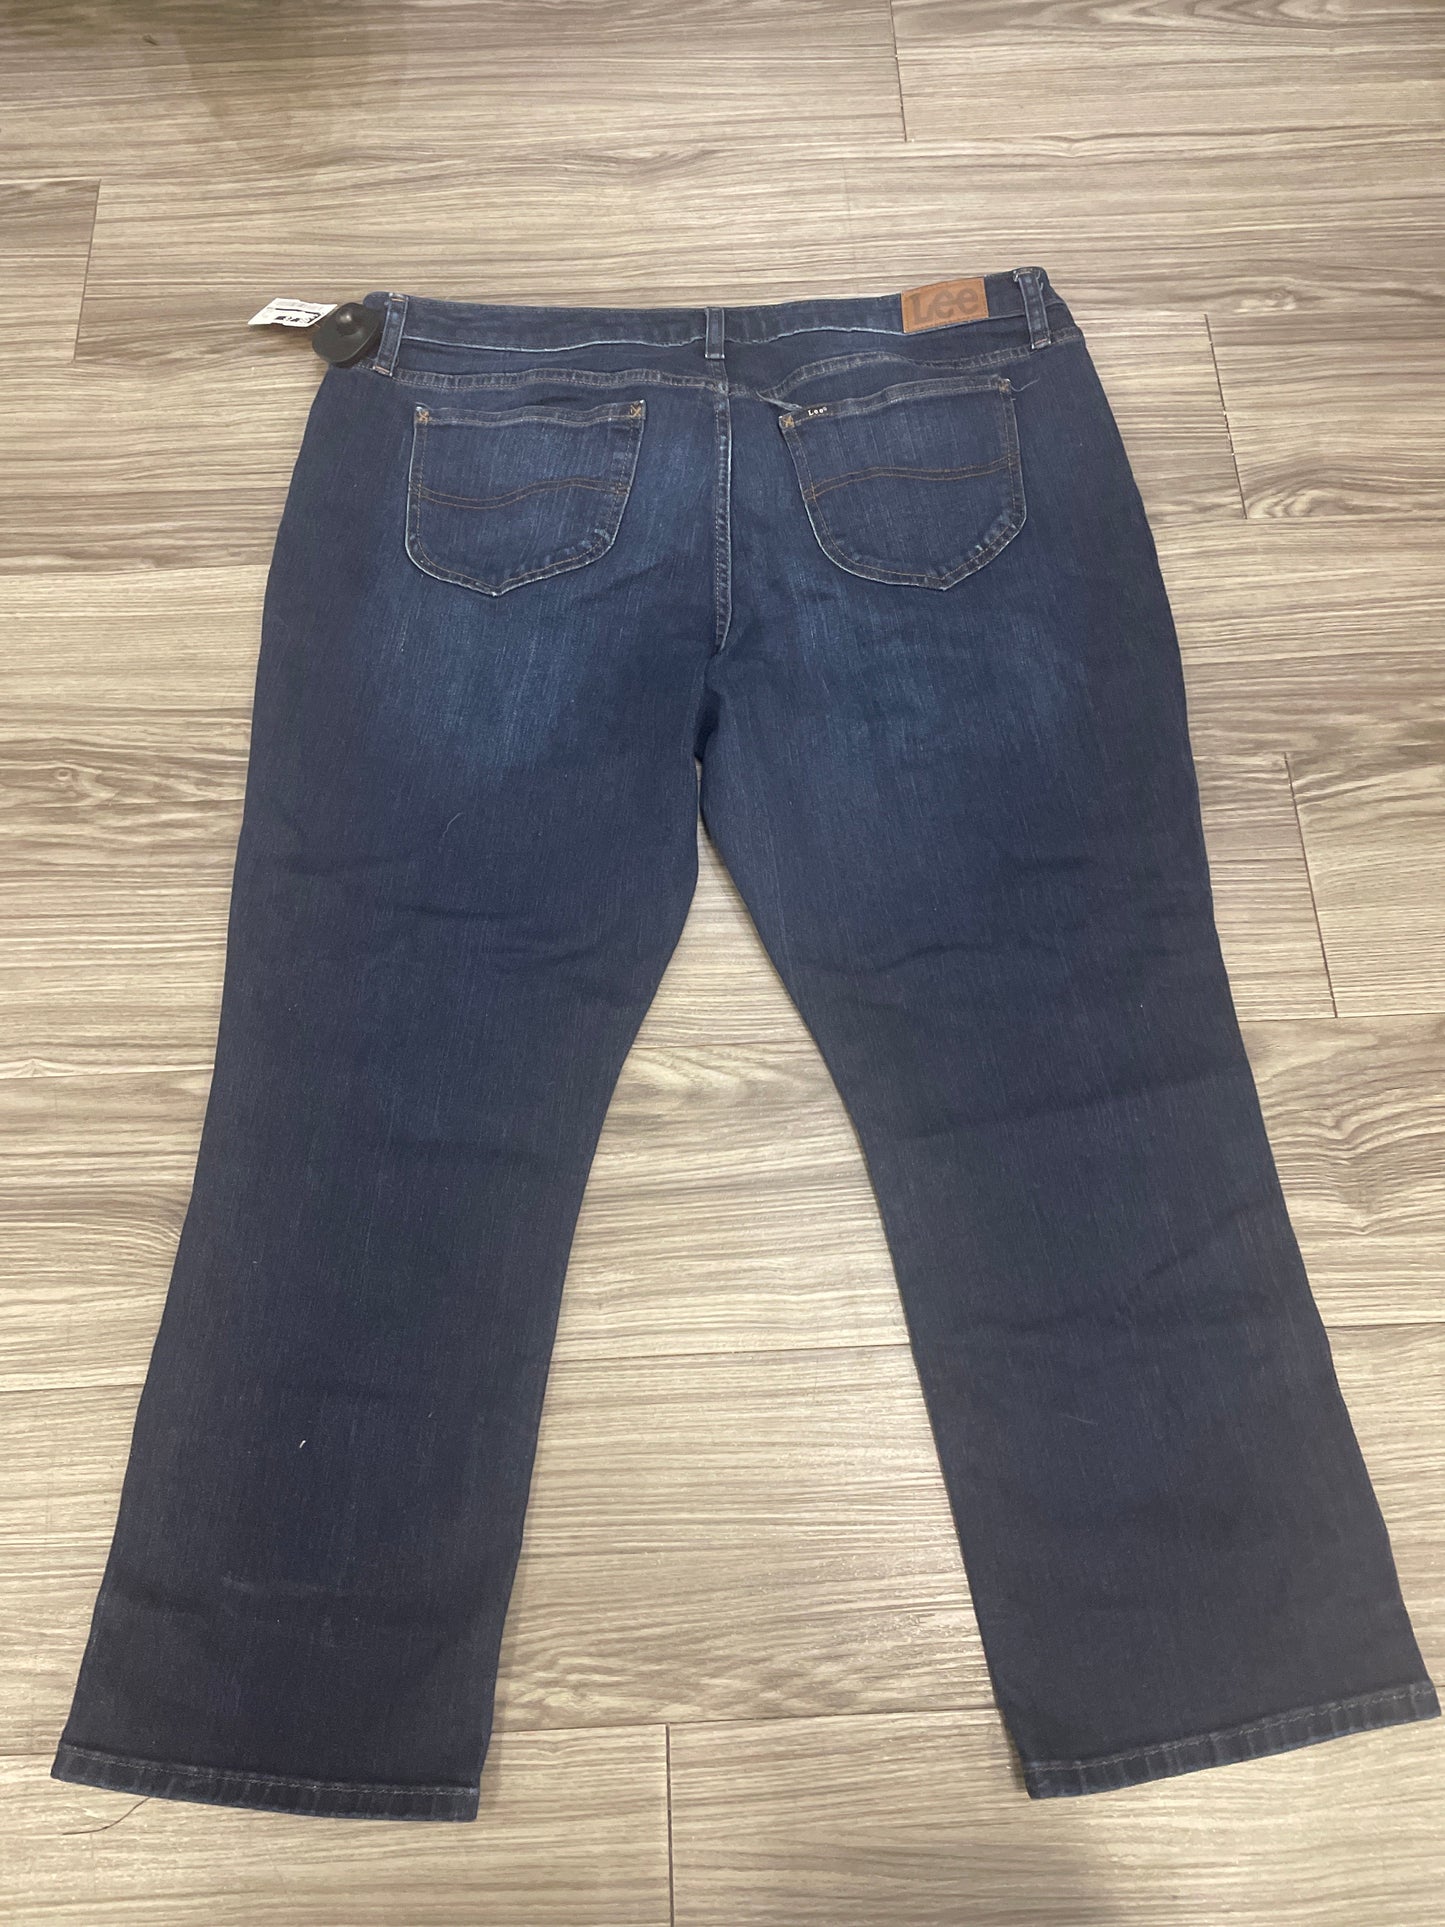 Jeans Skinny By Lee  Size: 20